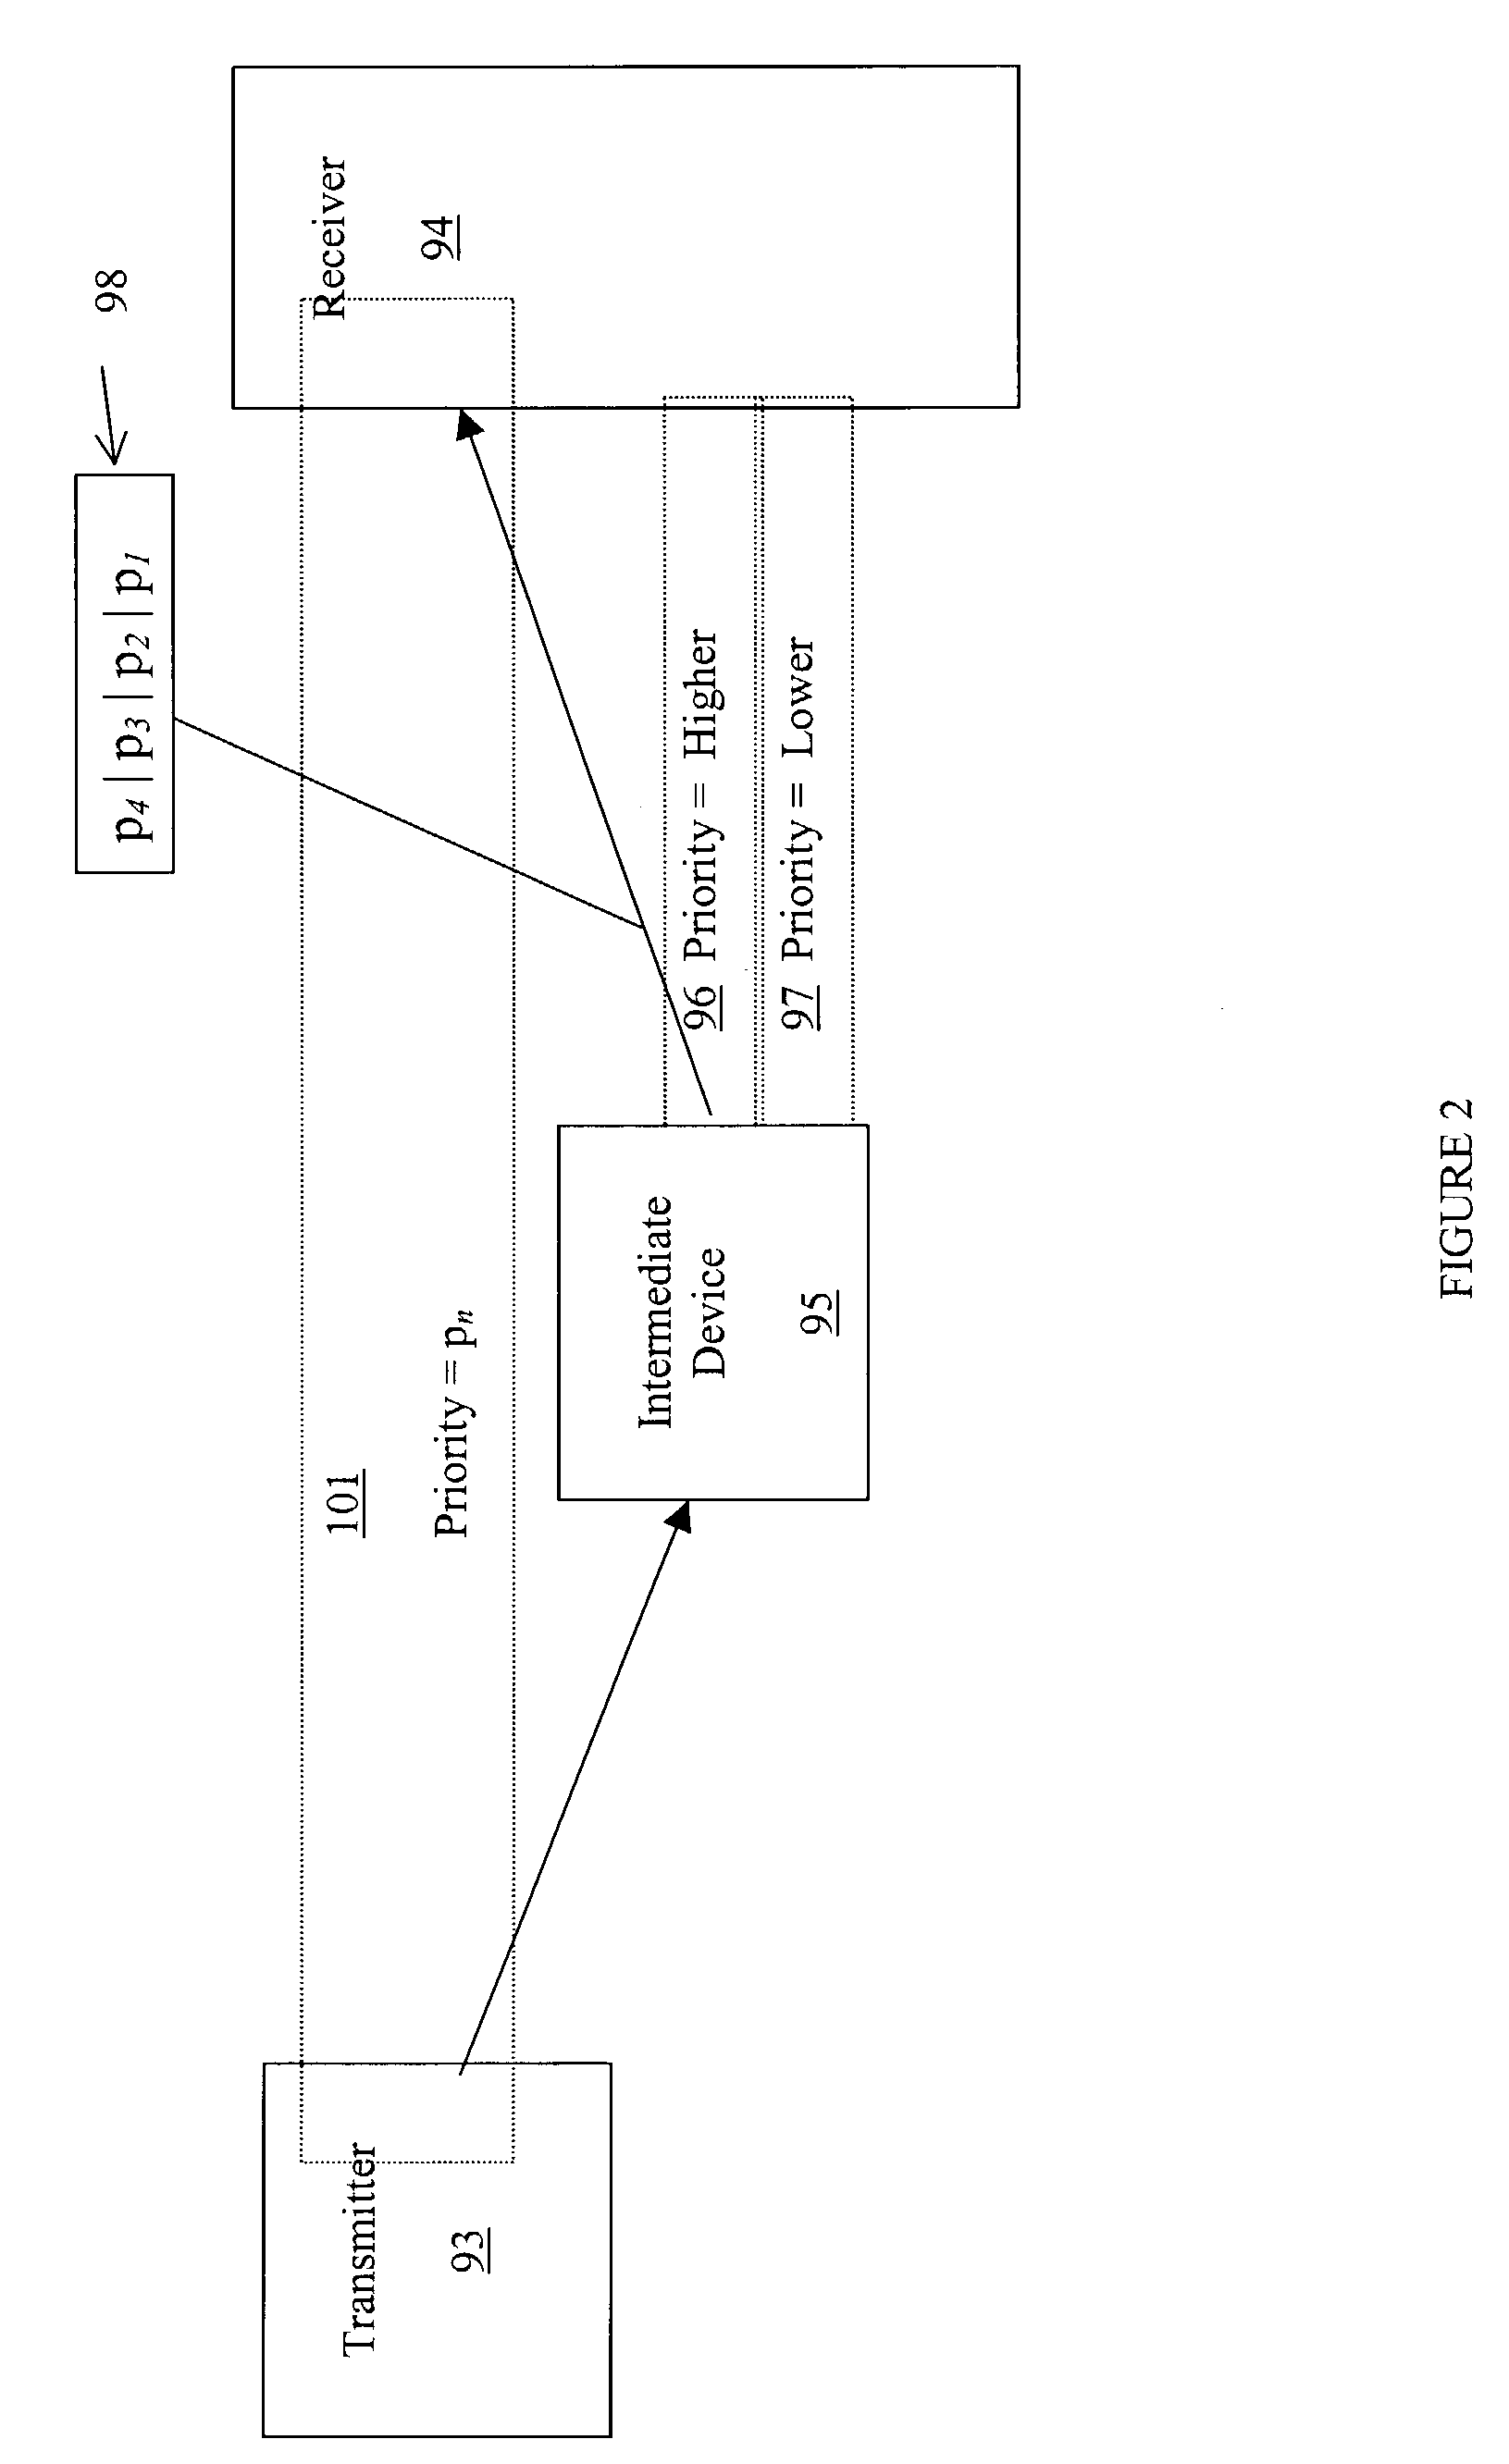 Method for splitting data and acknowledgements in a TCP session